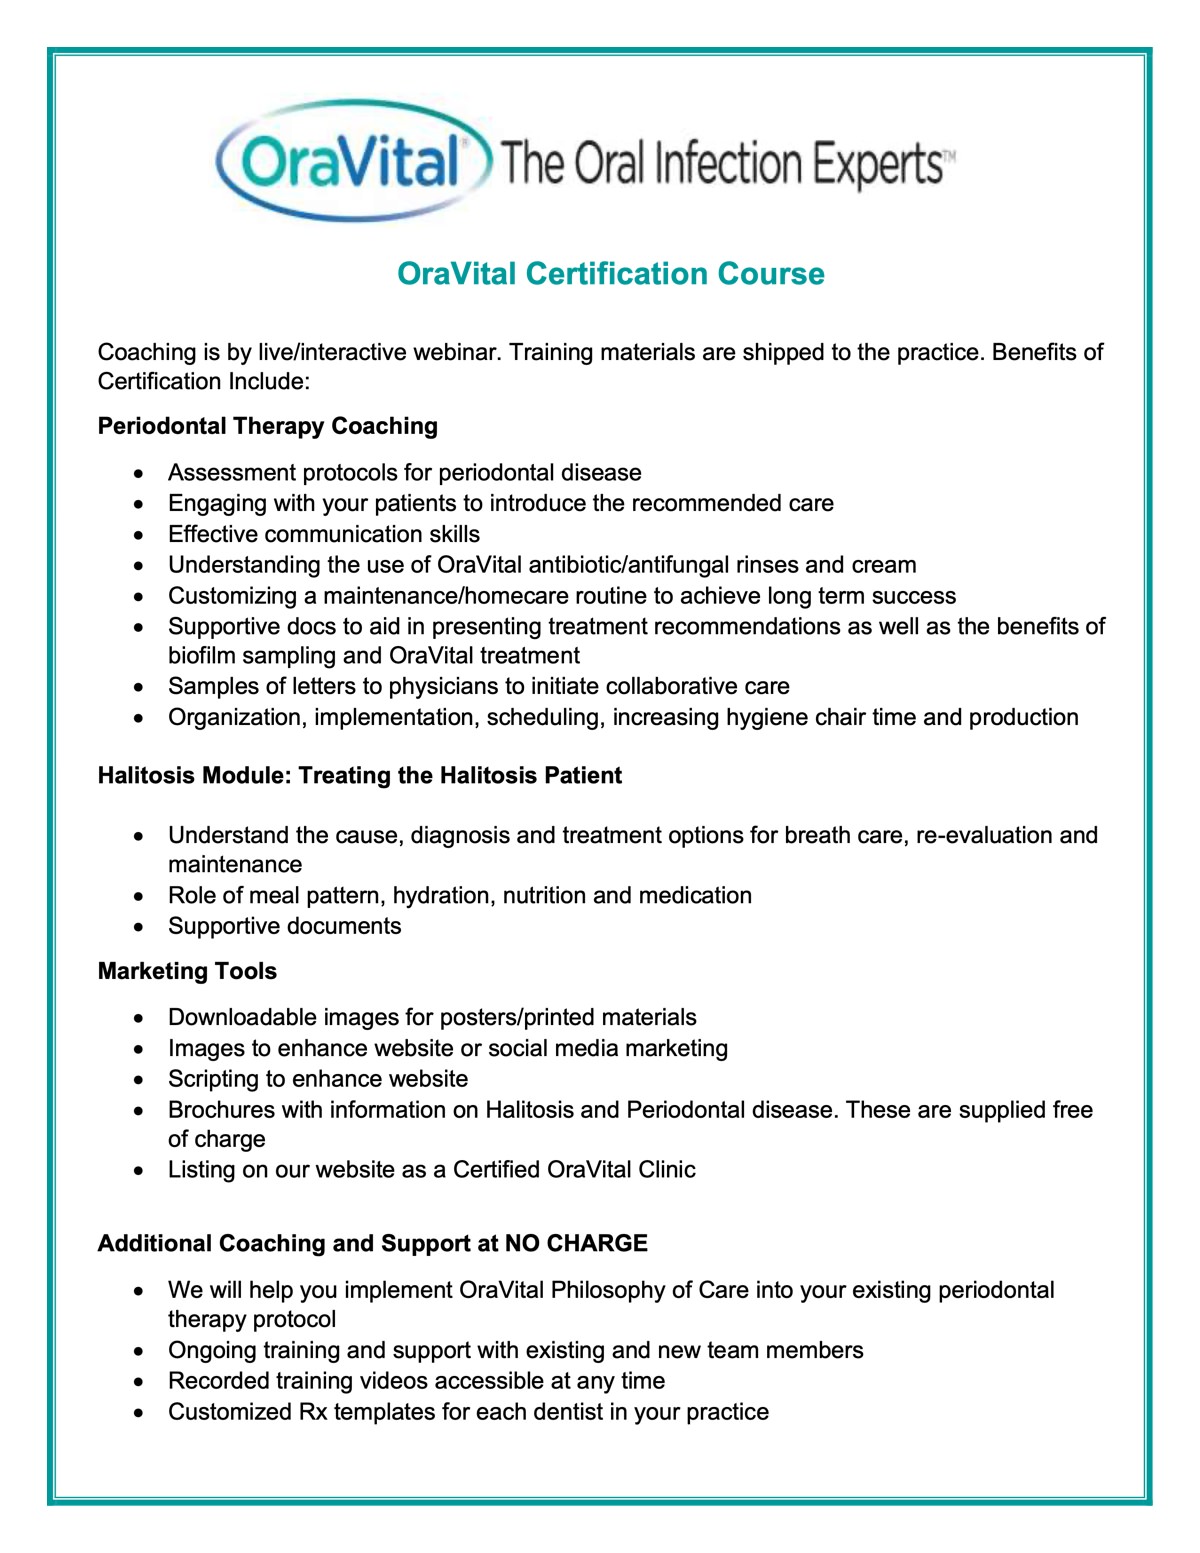 OraVital Certification Course benefits